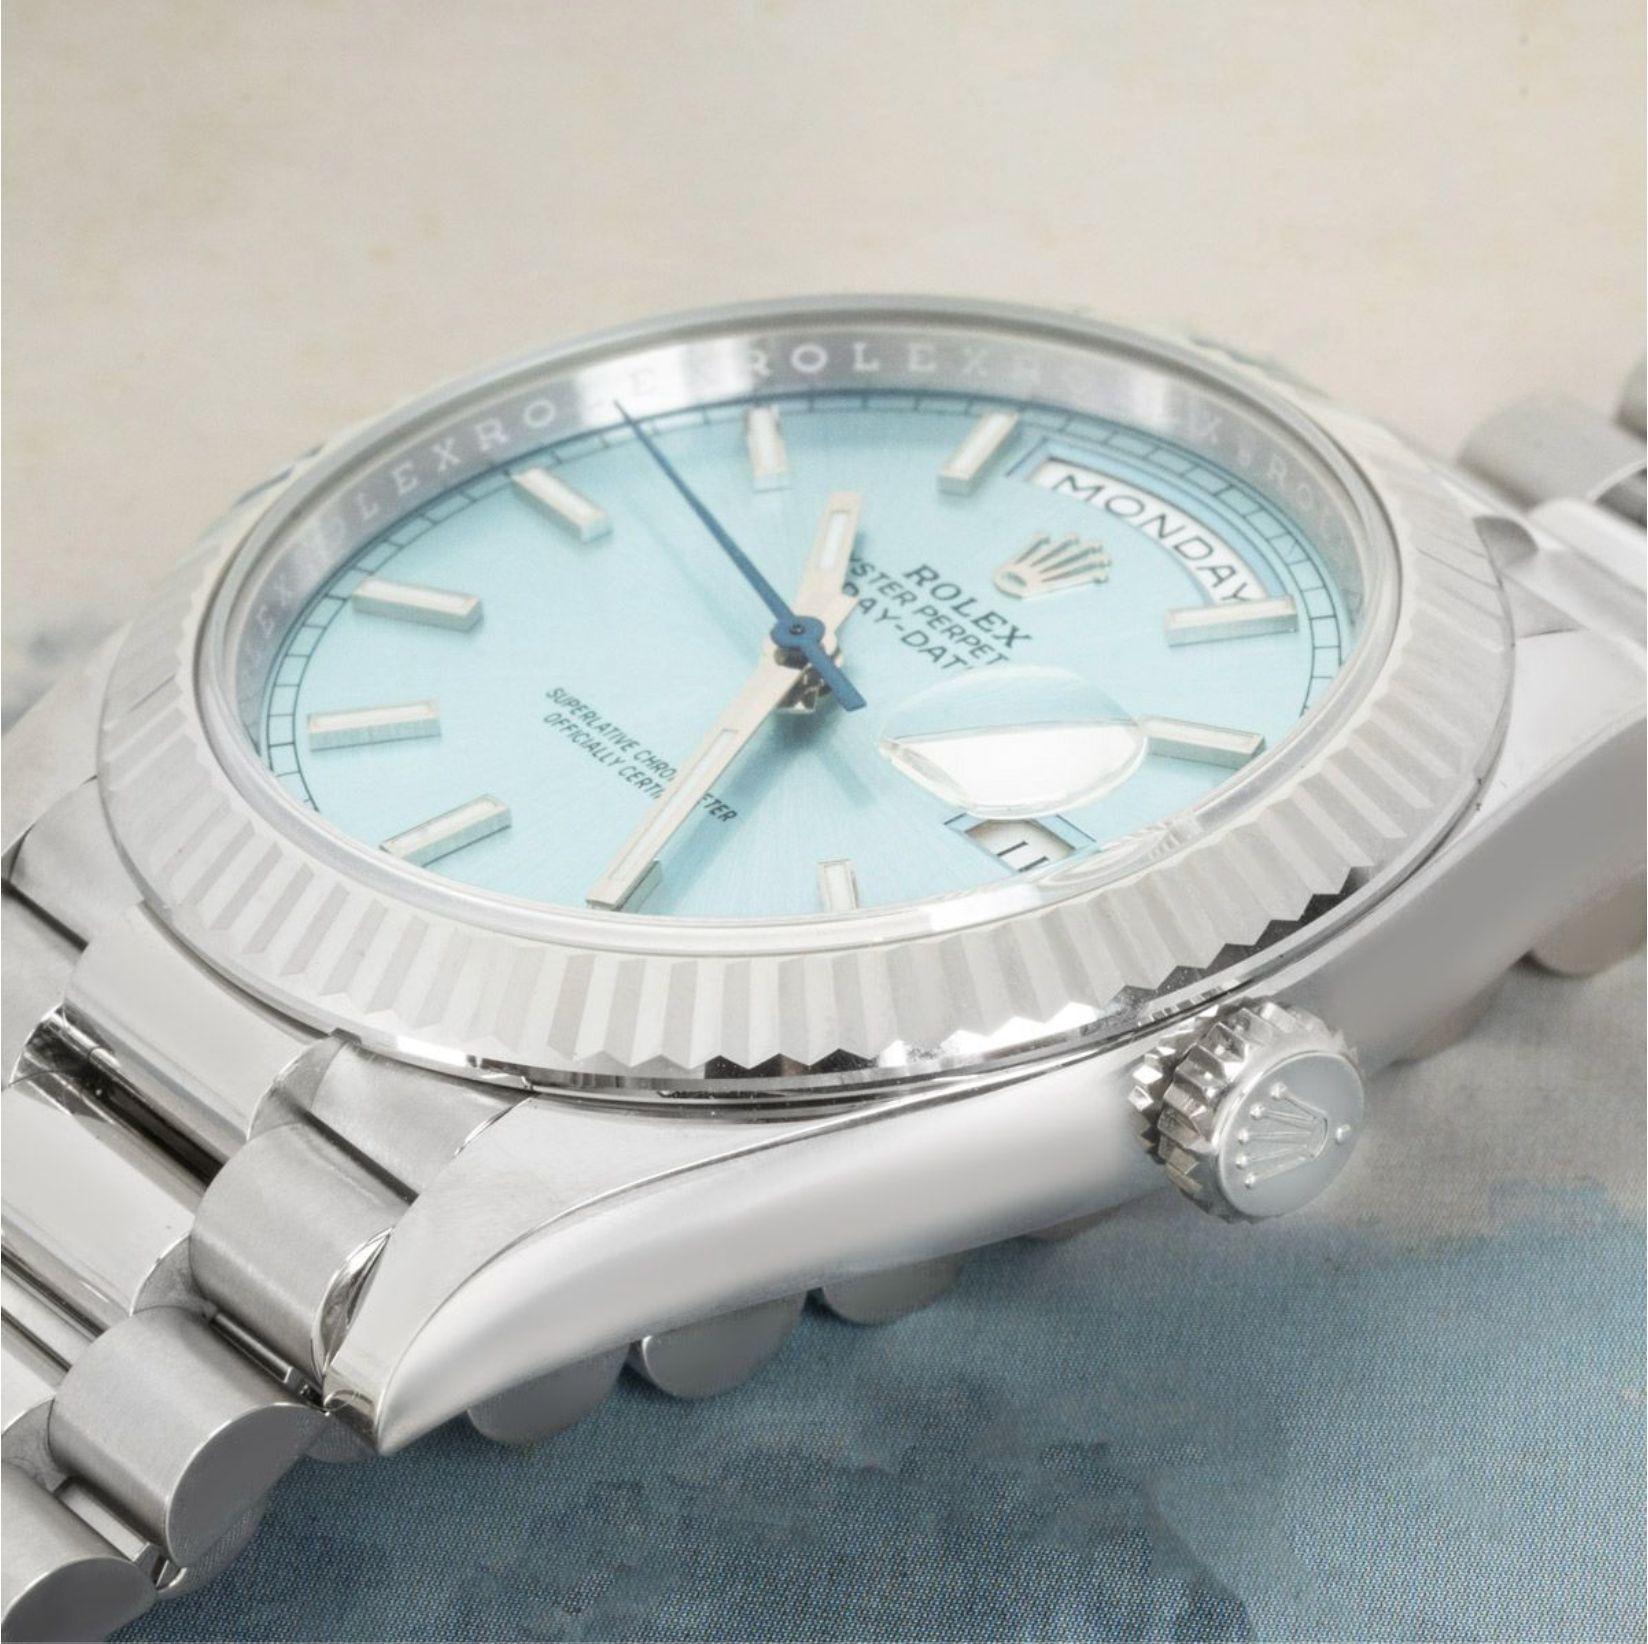 An unworn Day-Date 40mm crafted in platinum by Rolex. Featuring an ice blue dial with applied hour markers and a fluted platinum bezel new to the 2023 design.

Fitted with a scratch-resistant sapphire crystal, a self-winding automatic movement and a